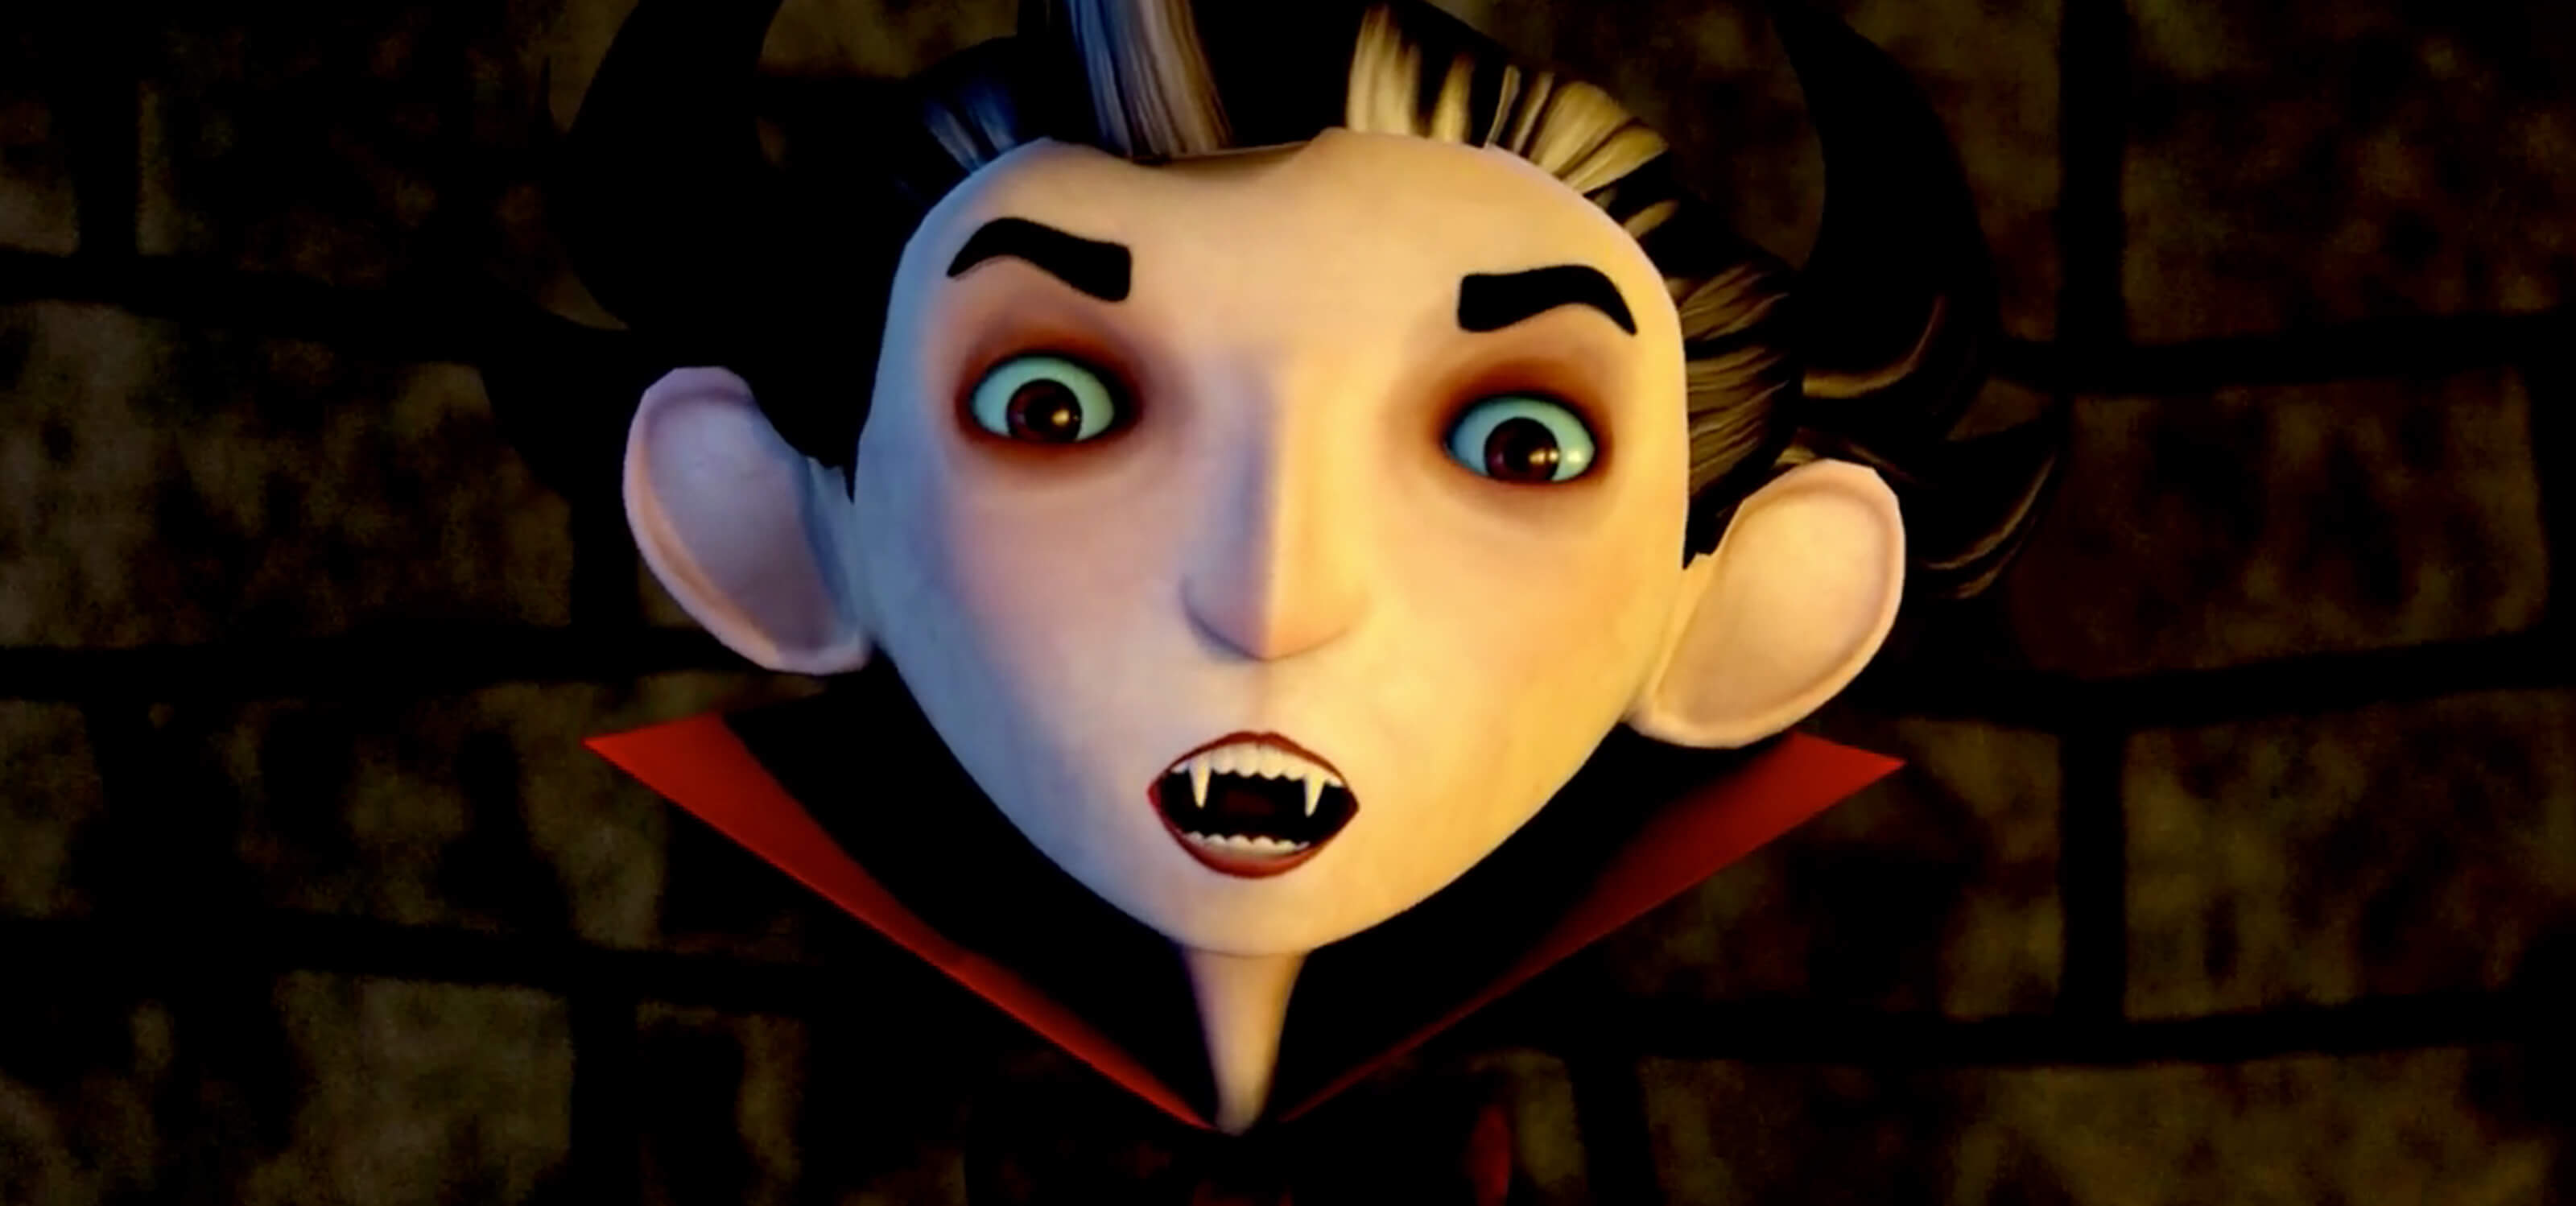 Close-up shot of a 3D animated vampire with a pale face, fangs, and red collar